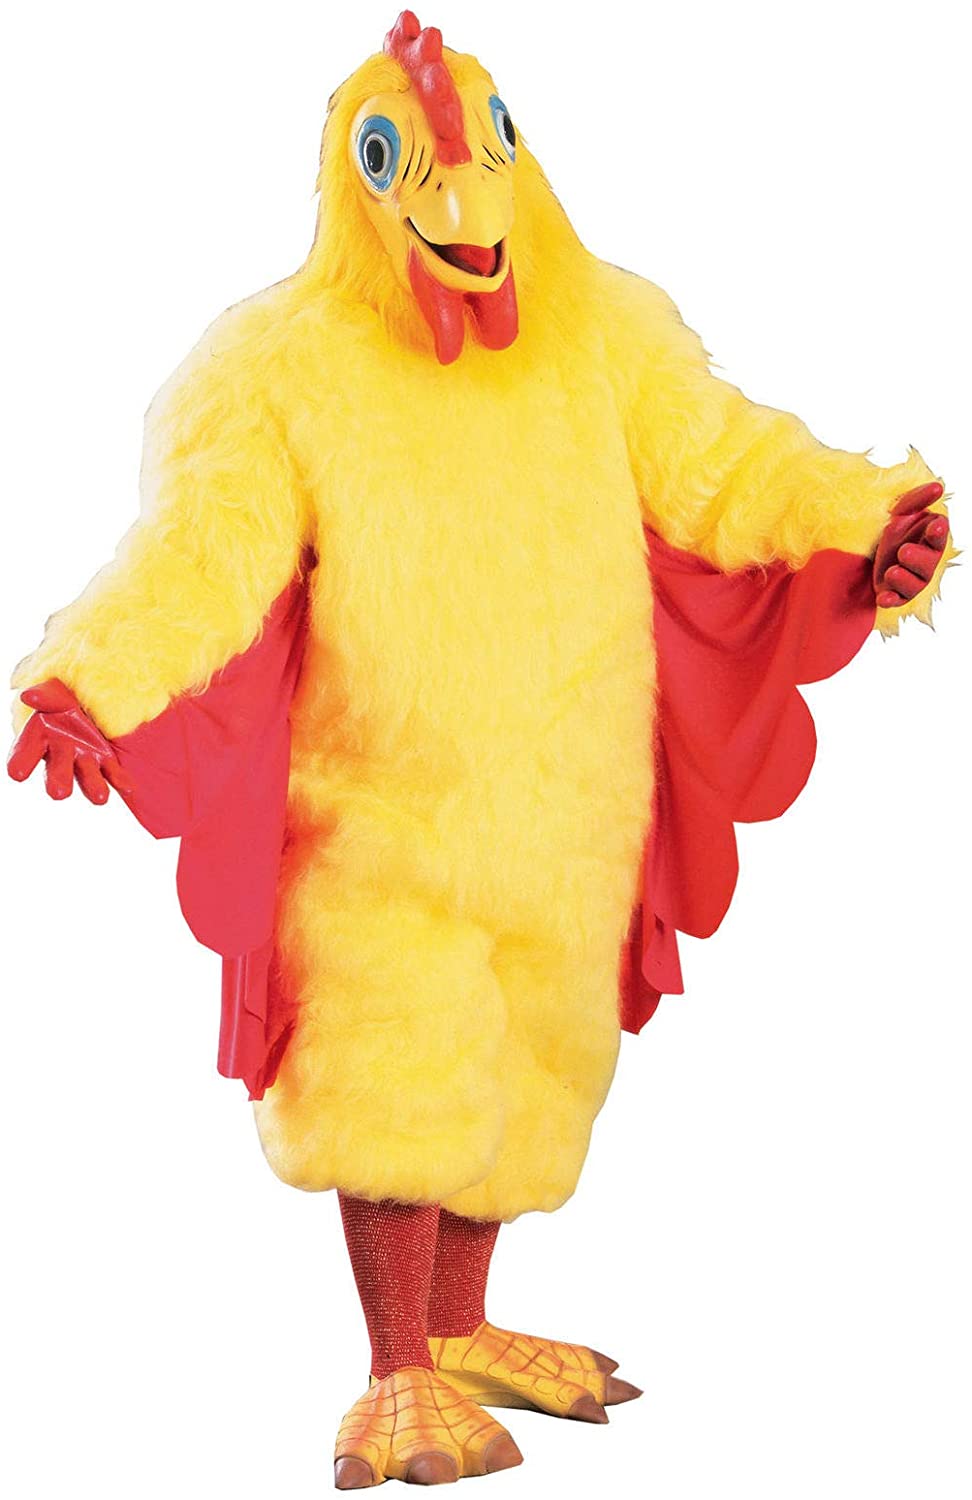 Chicken costume with gloves and feet